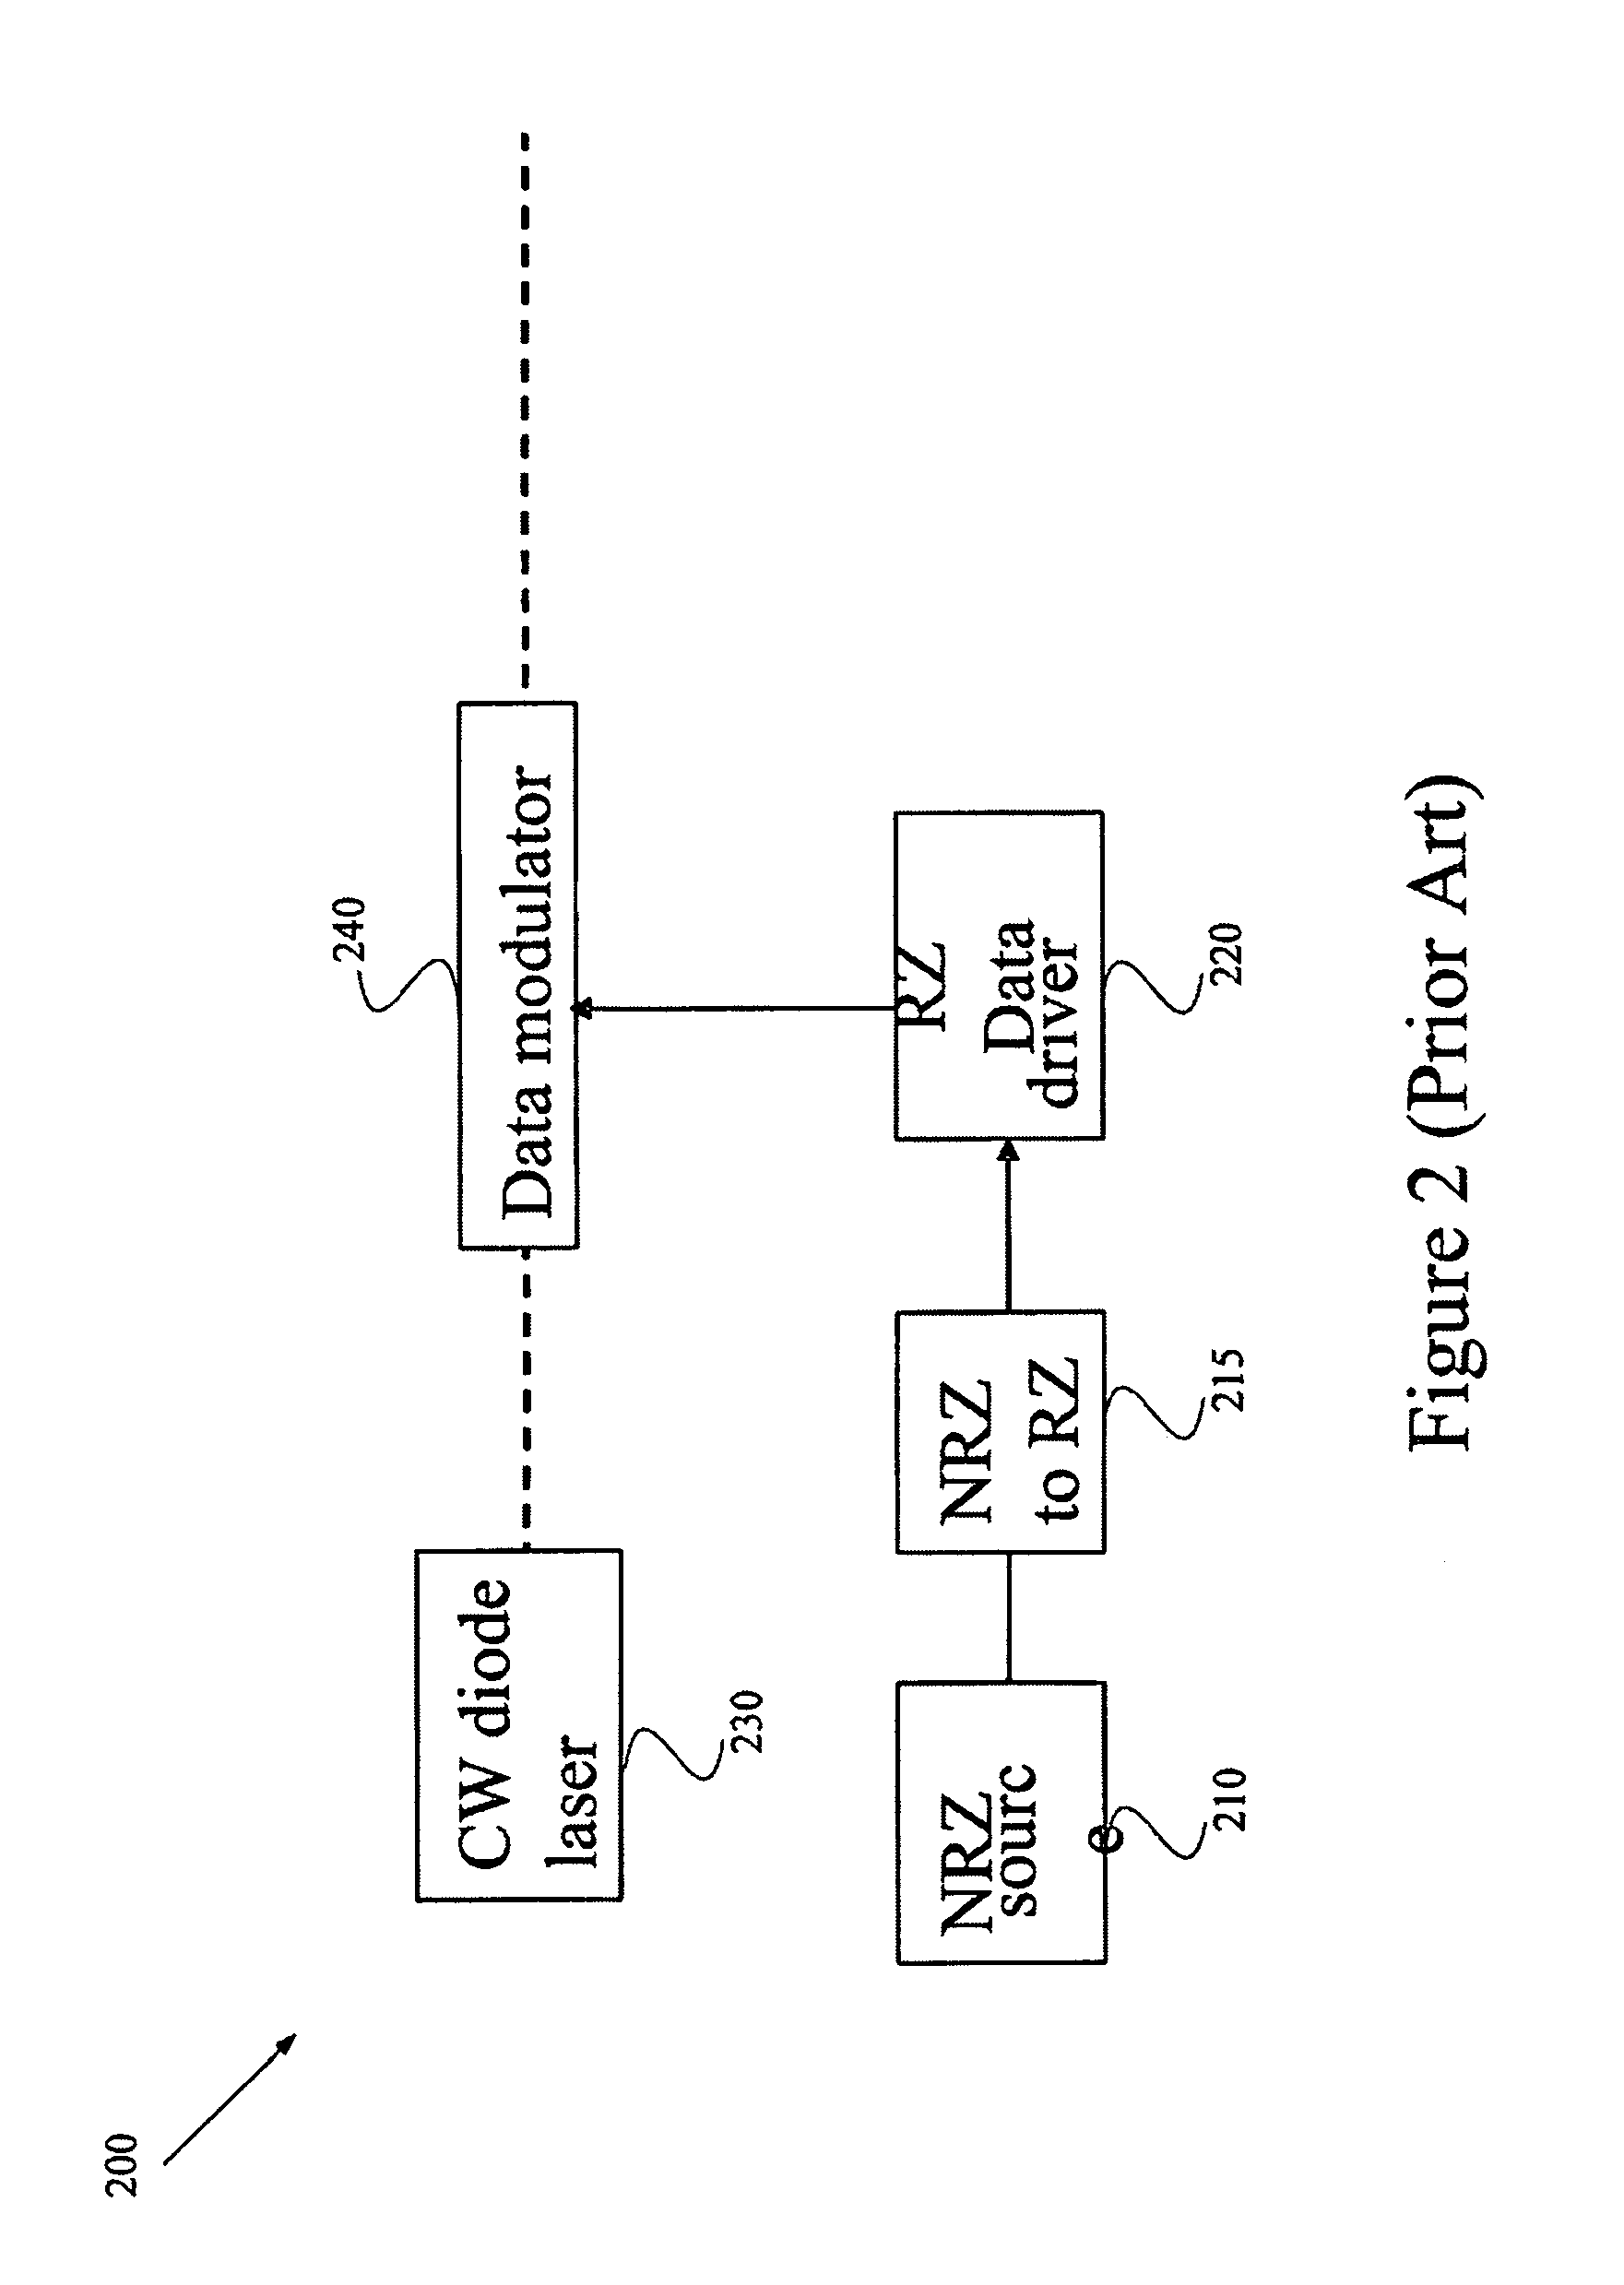 System and method for generating optical return-to-zero signals with alternating bi-phase shift and frequency chirp